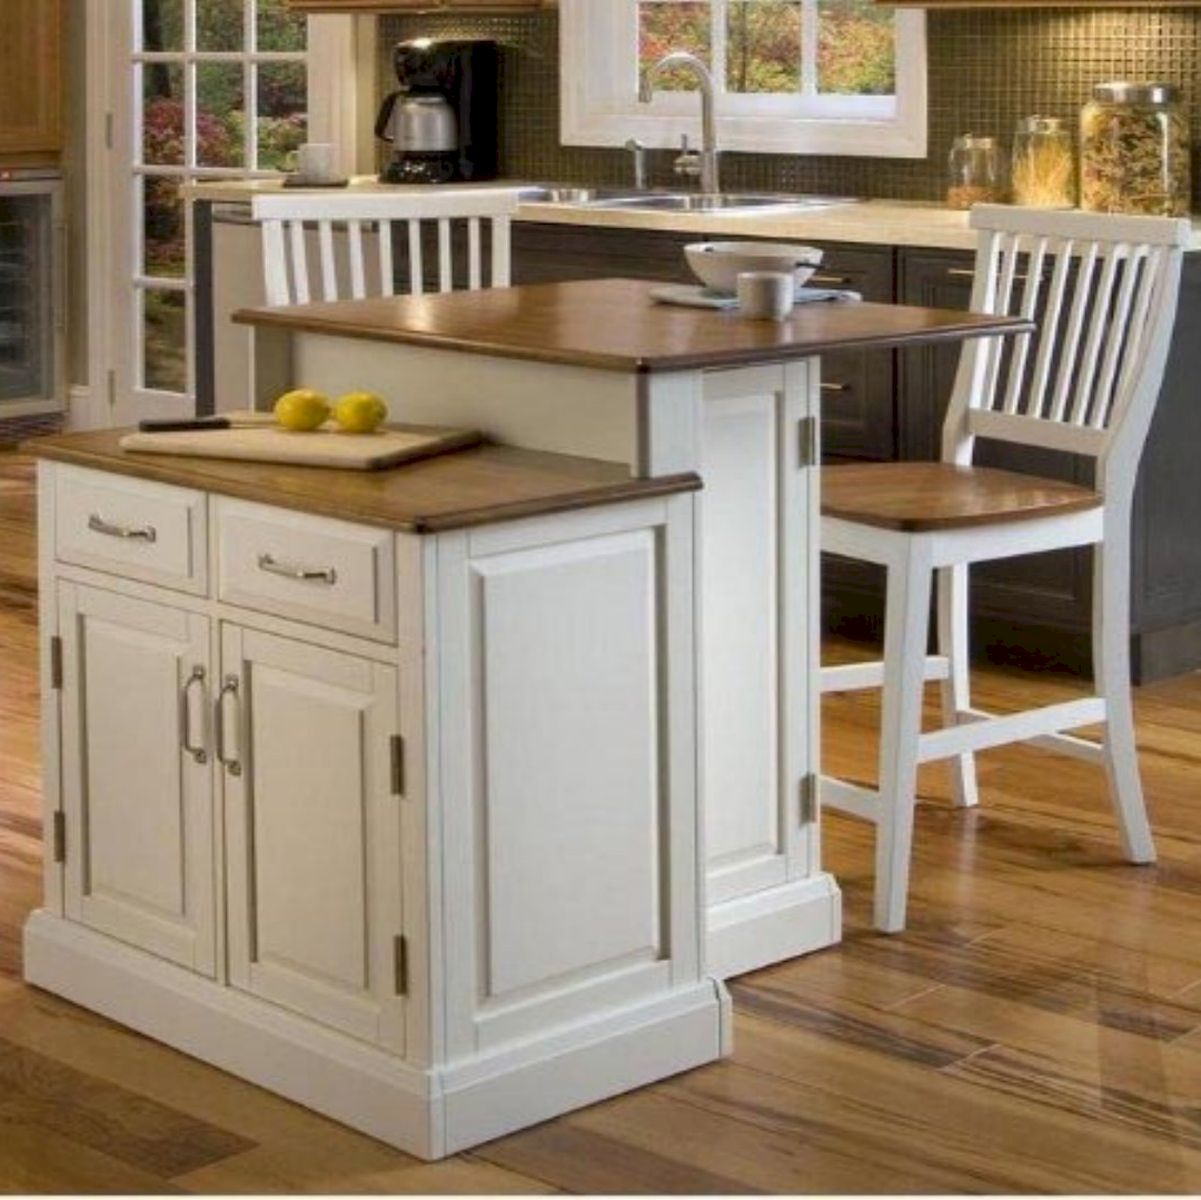 Movable Kitchen Islands With Seating photo - 4